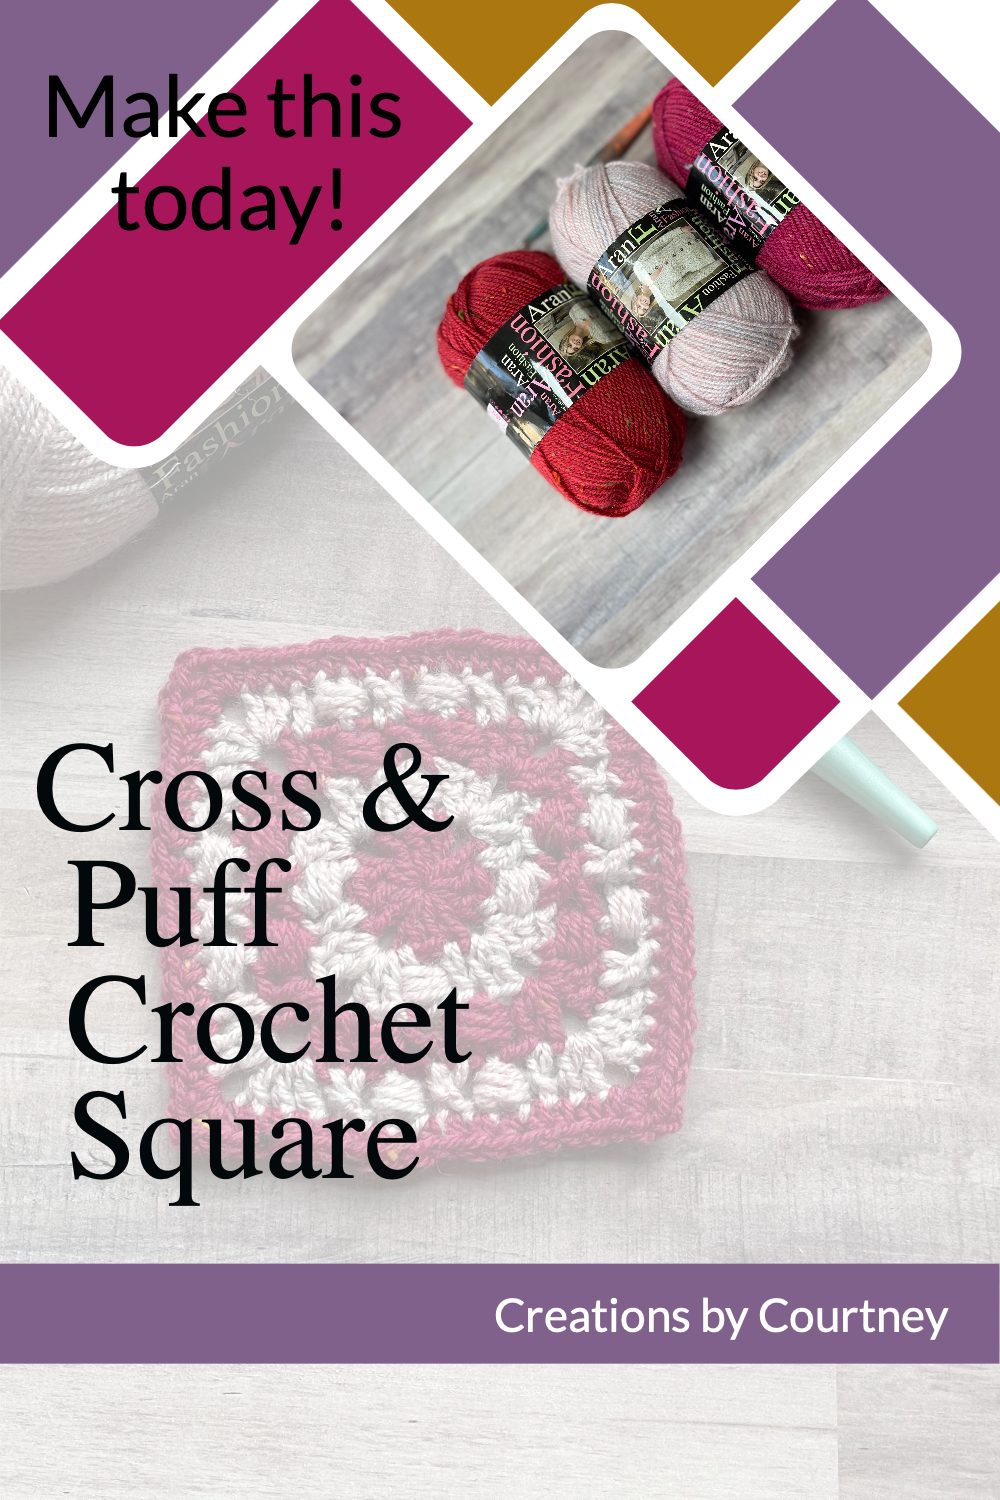 Pin image of the Cross & Puff Crochet Square with a decreased opacity at the bottom. Angled squares and rectangles are across the upper right corner with white space around each shape in purple, fuchsia and a dark mustard colors. The second image on top of the squares is of three skeins of King Cole Fashion Aran Yarn in a shade of red, pale pink and fuchsia.